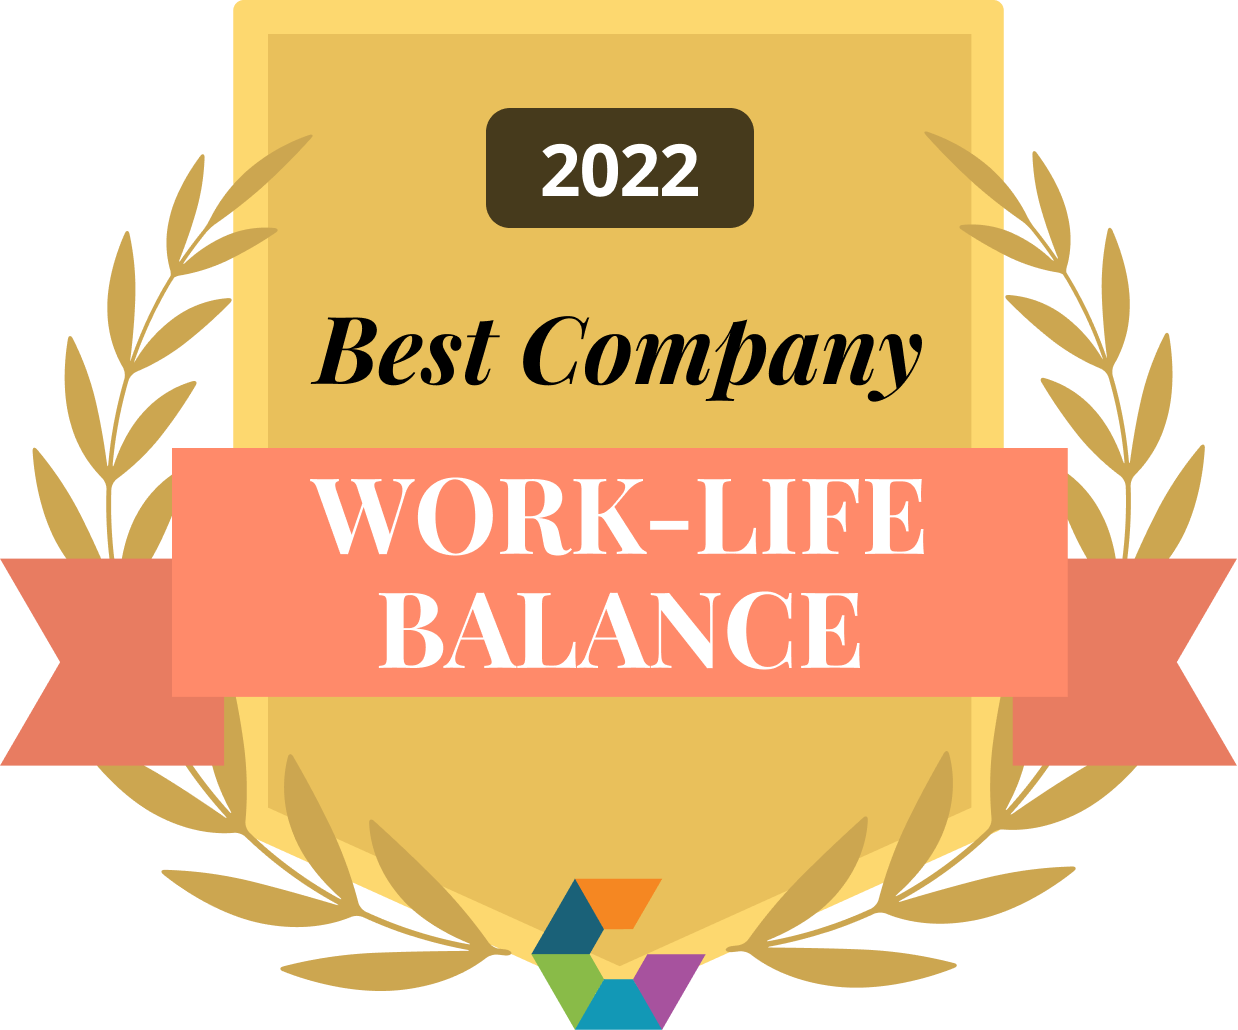 Comparably Best Company Work-Life Balance